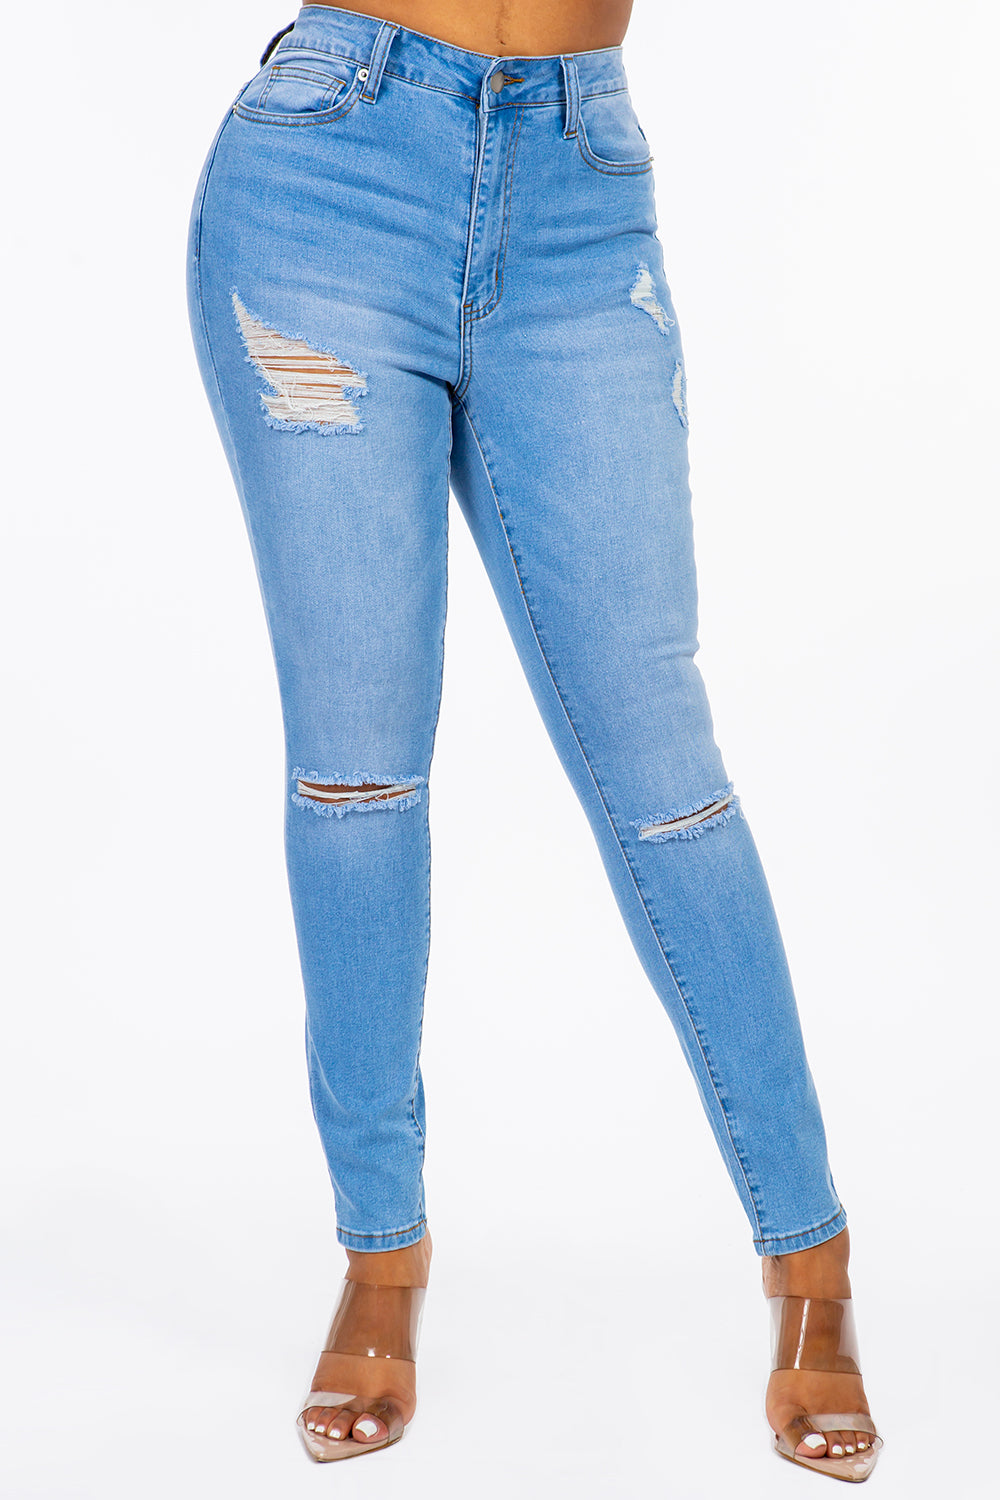 Extreme Stretch Distressed High Rise Skinny Jeans Light YH2212